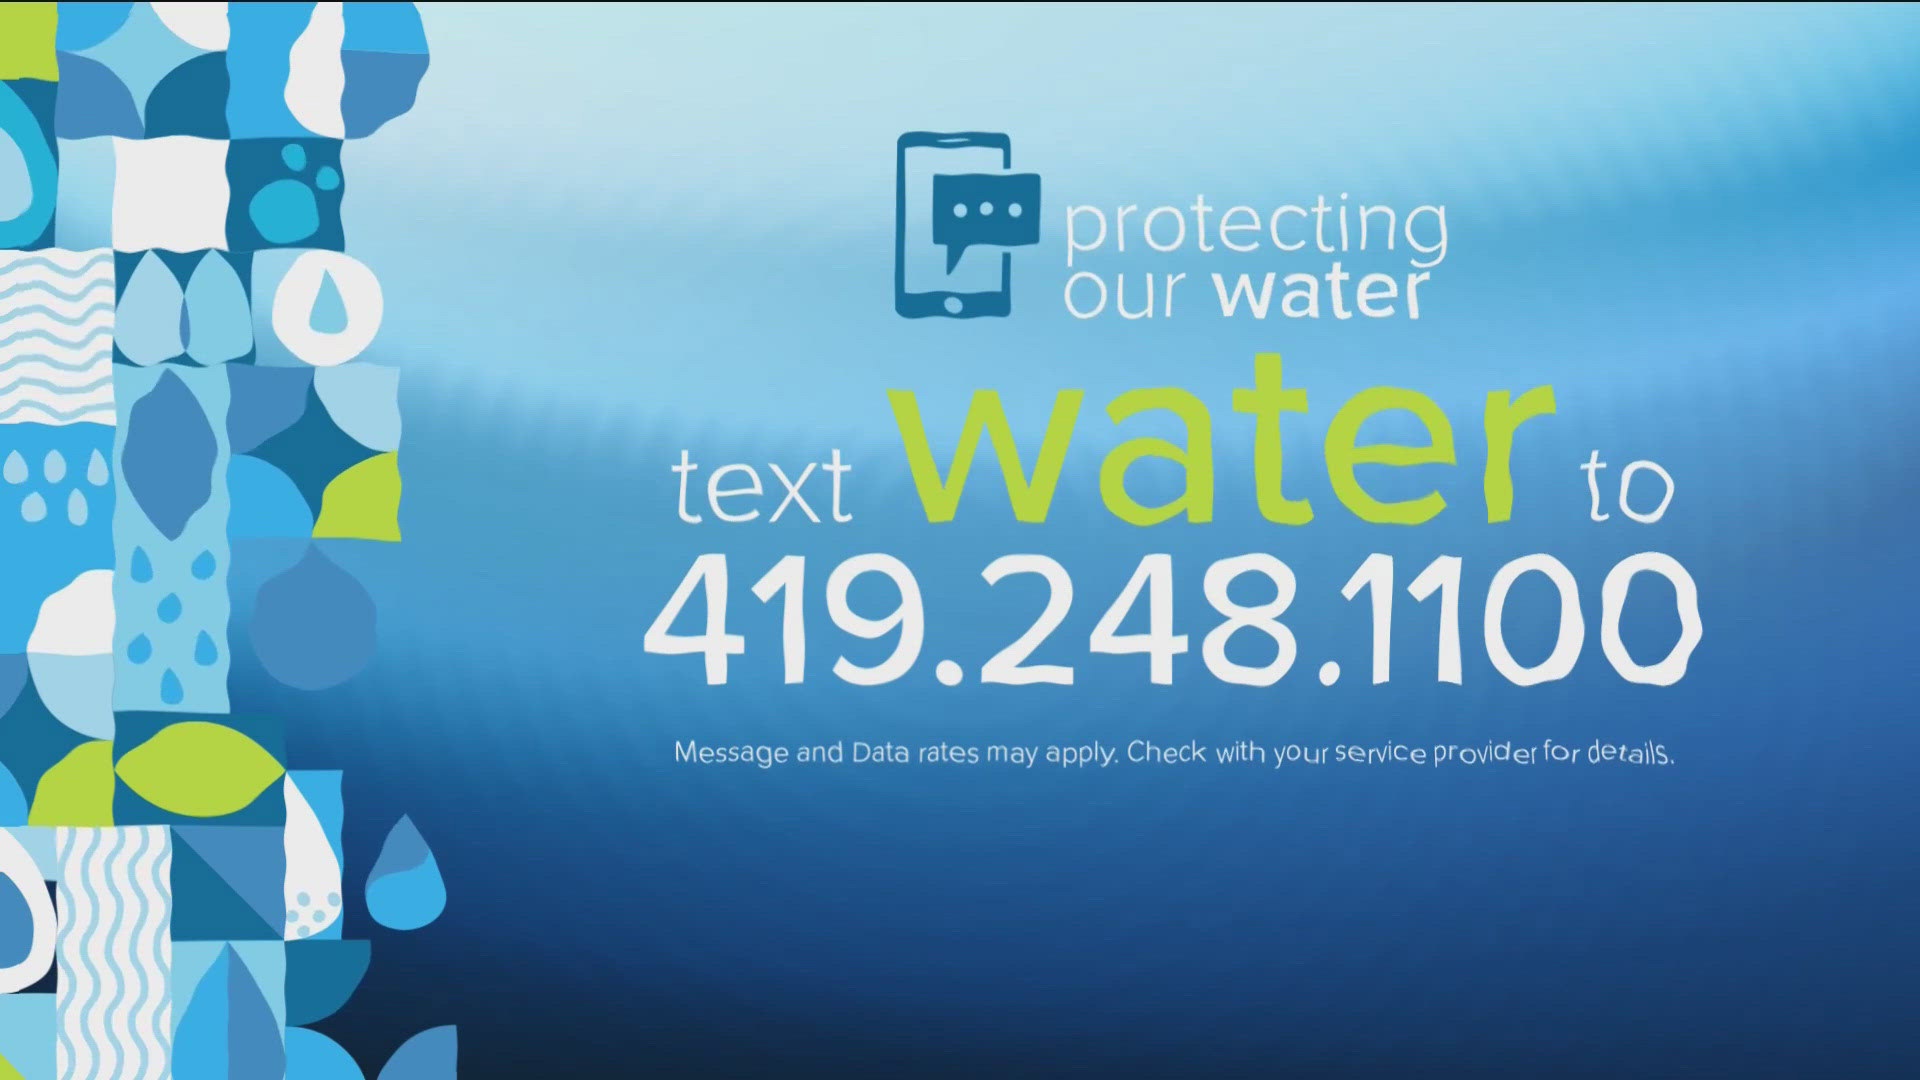 Text "WATER" to 419-248-1100 for more coverage on Protecting Our Water and a look back at the 2014 water crisis.